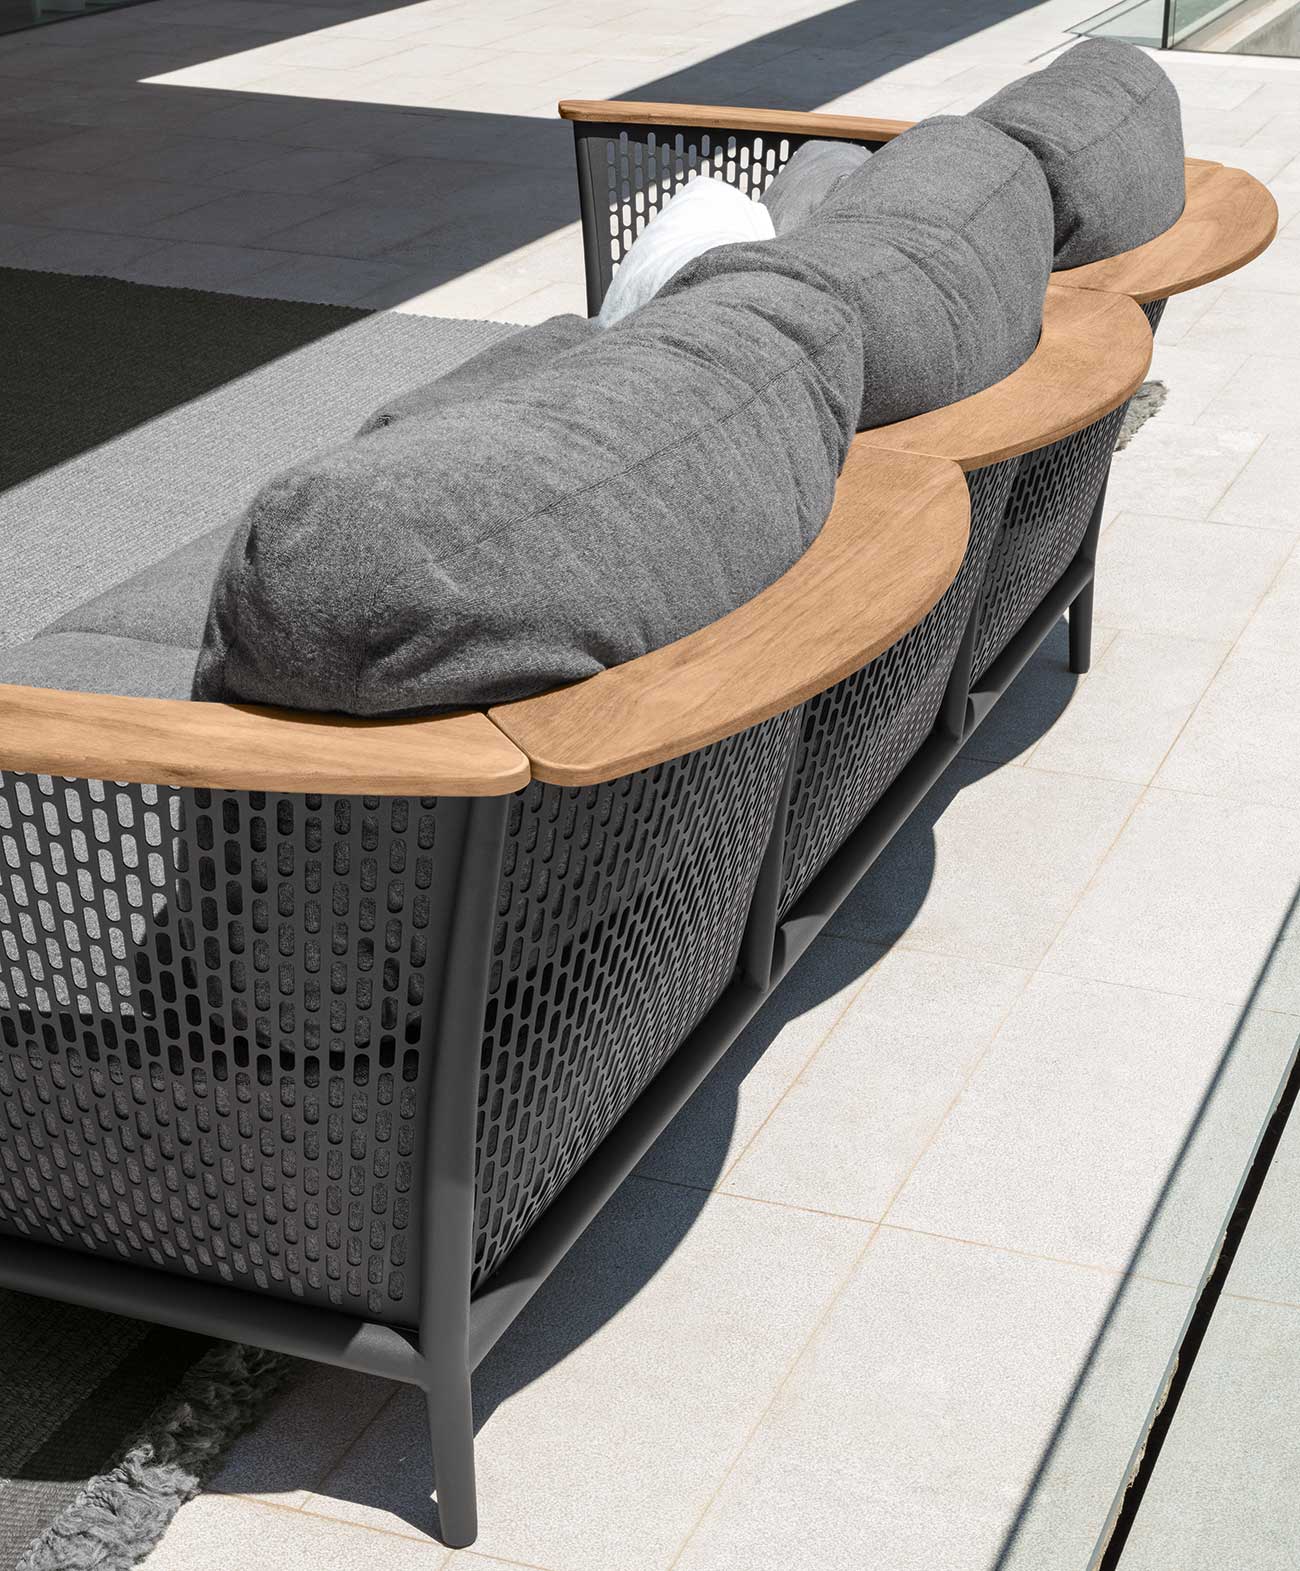 Design Marco Acerbis. Sofa, armchairs and coffee table in aluminium and teak, a luxurious and modern outdoor lounge for garden, yacht, poolside. Free delivery.